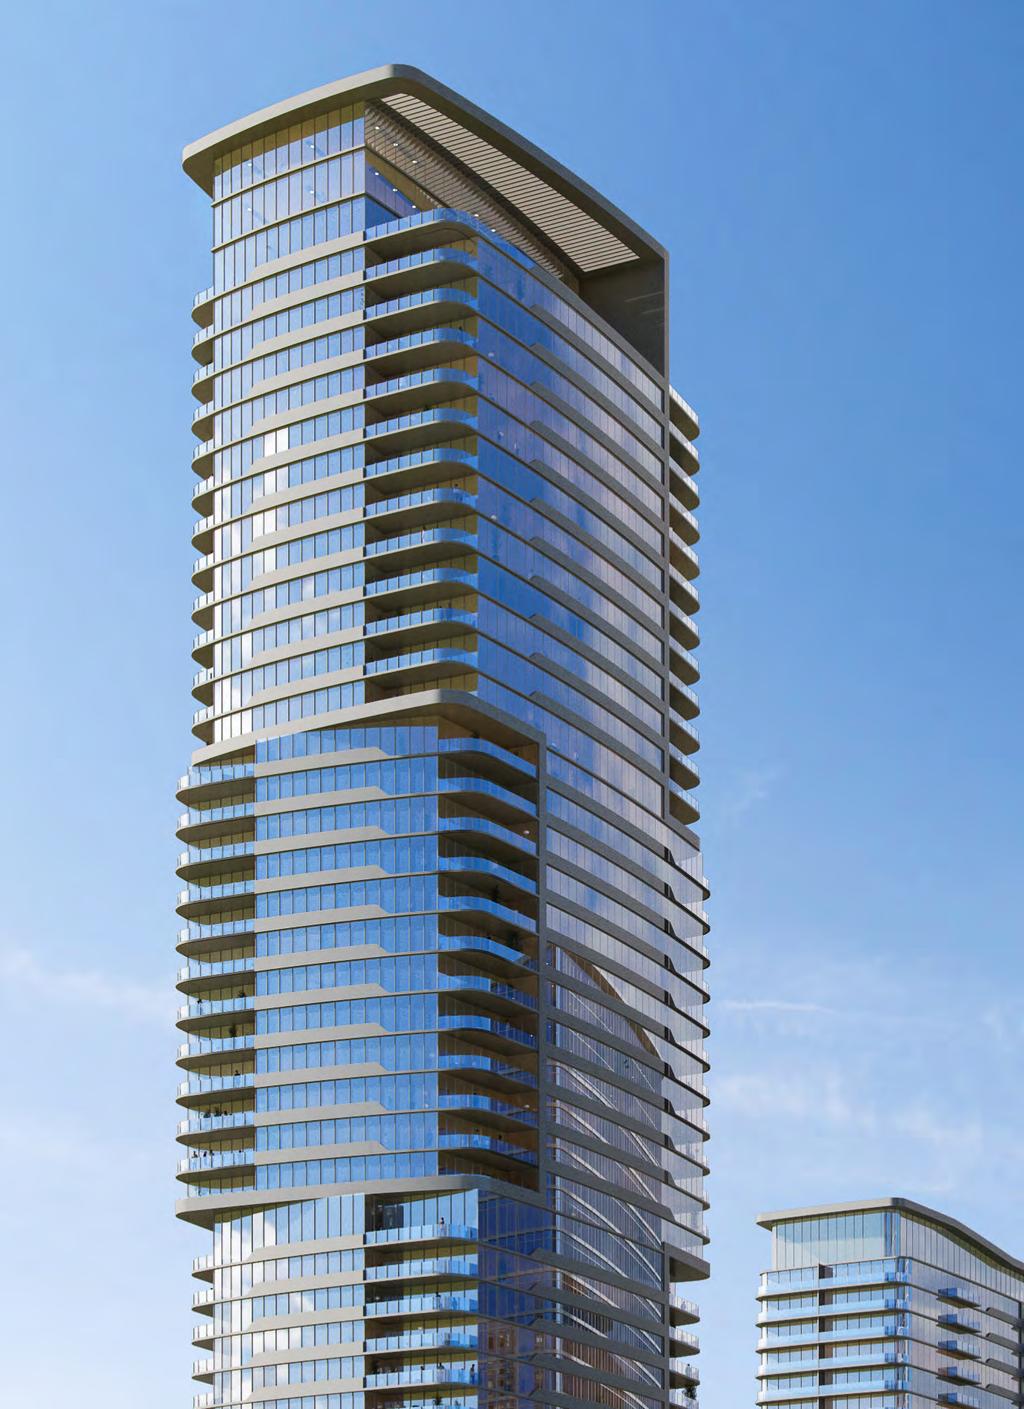 THE RESIDENCES AT THE ALLEN 99 luxury condos 360 unobstructed views of downtown Houston Private entrances Balcony plunge pool in select units 24-hr concierge service Helipad Garage and valet parking